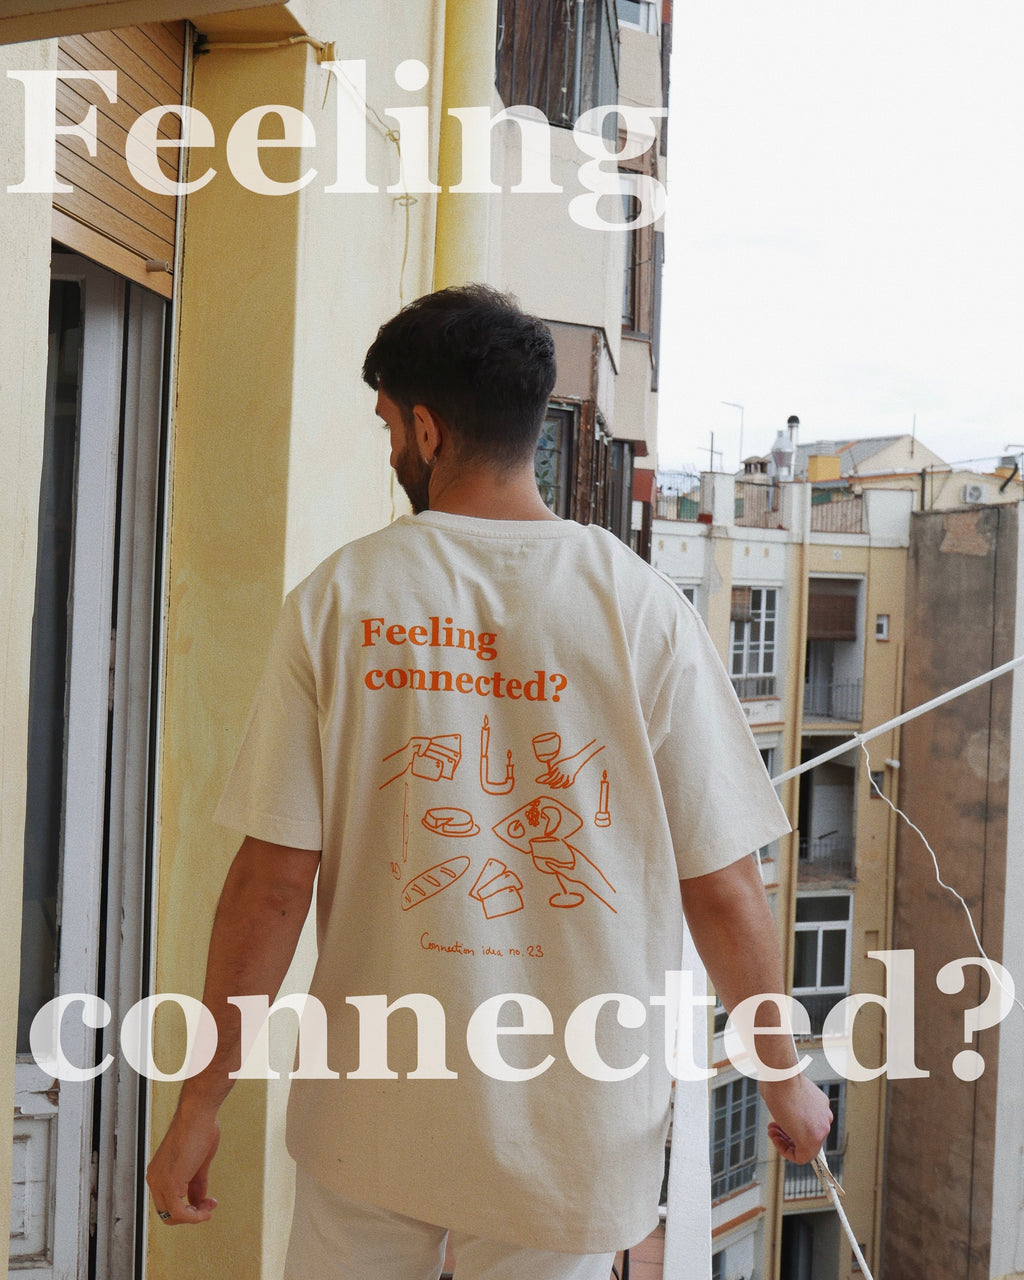 Feeling connected?